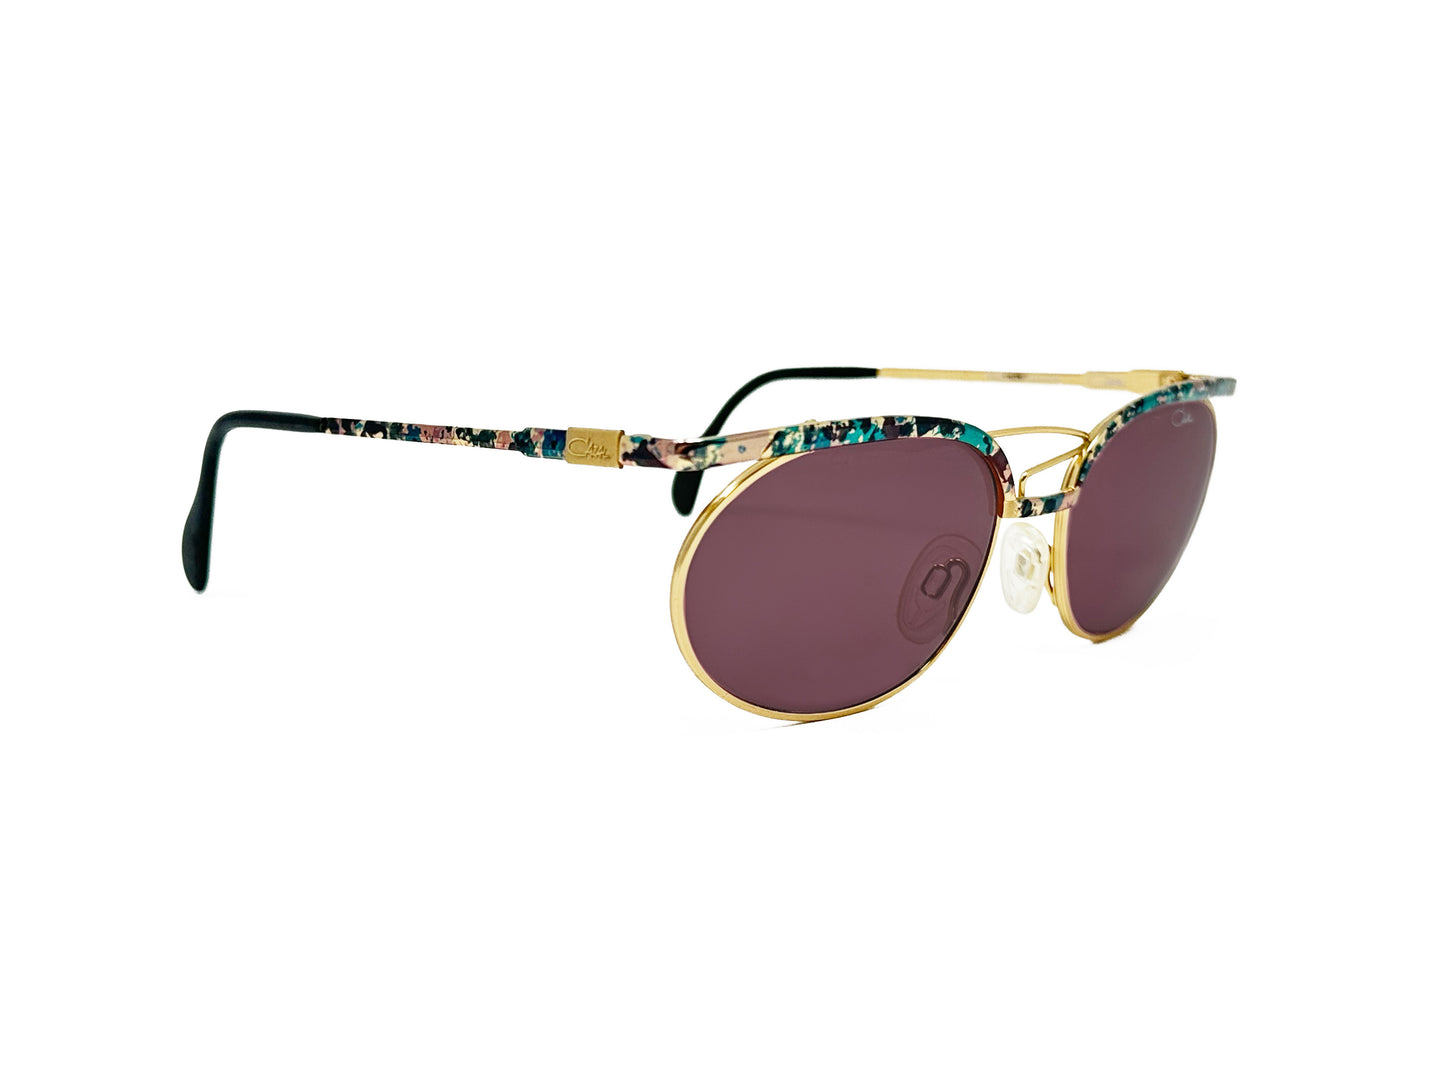 Cazal oval, metal sunglass with green tortoise bar across each lens and spiral wire on nose bridge. Model: 263/3. Color:425 Gold metal with green tortoise pattern. Side view.